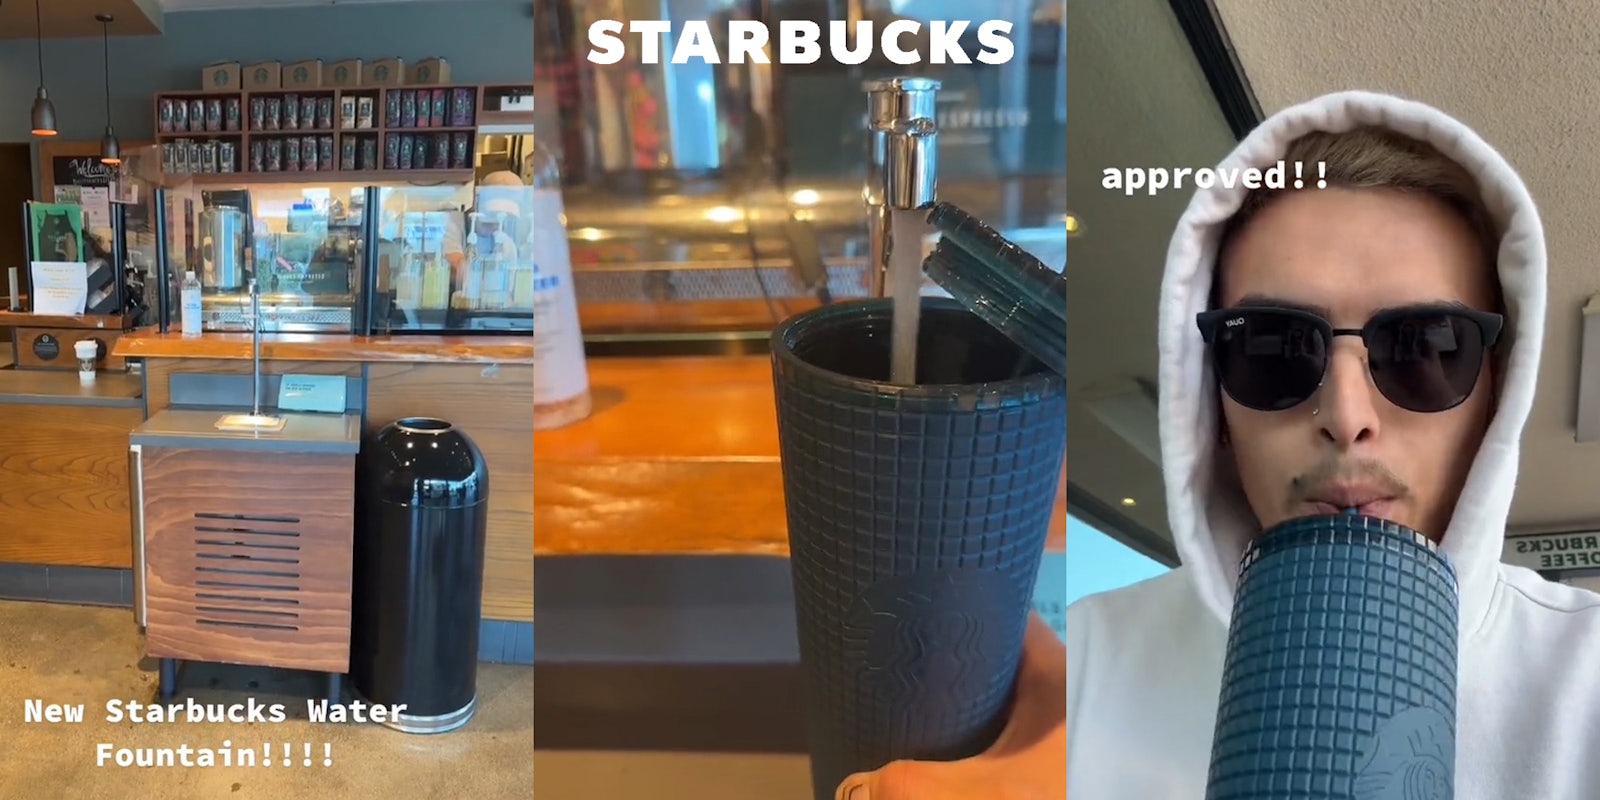 Starbucks water fountain with caption 'New Starbucks Water Fountain!!!!' (l) Starbucks water fountain with cup filling water and Starbucks logo at top (c) Starbucks customer drinkingwith caption 'approved!!' (r)